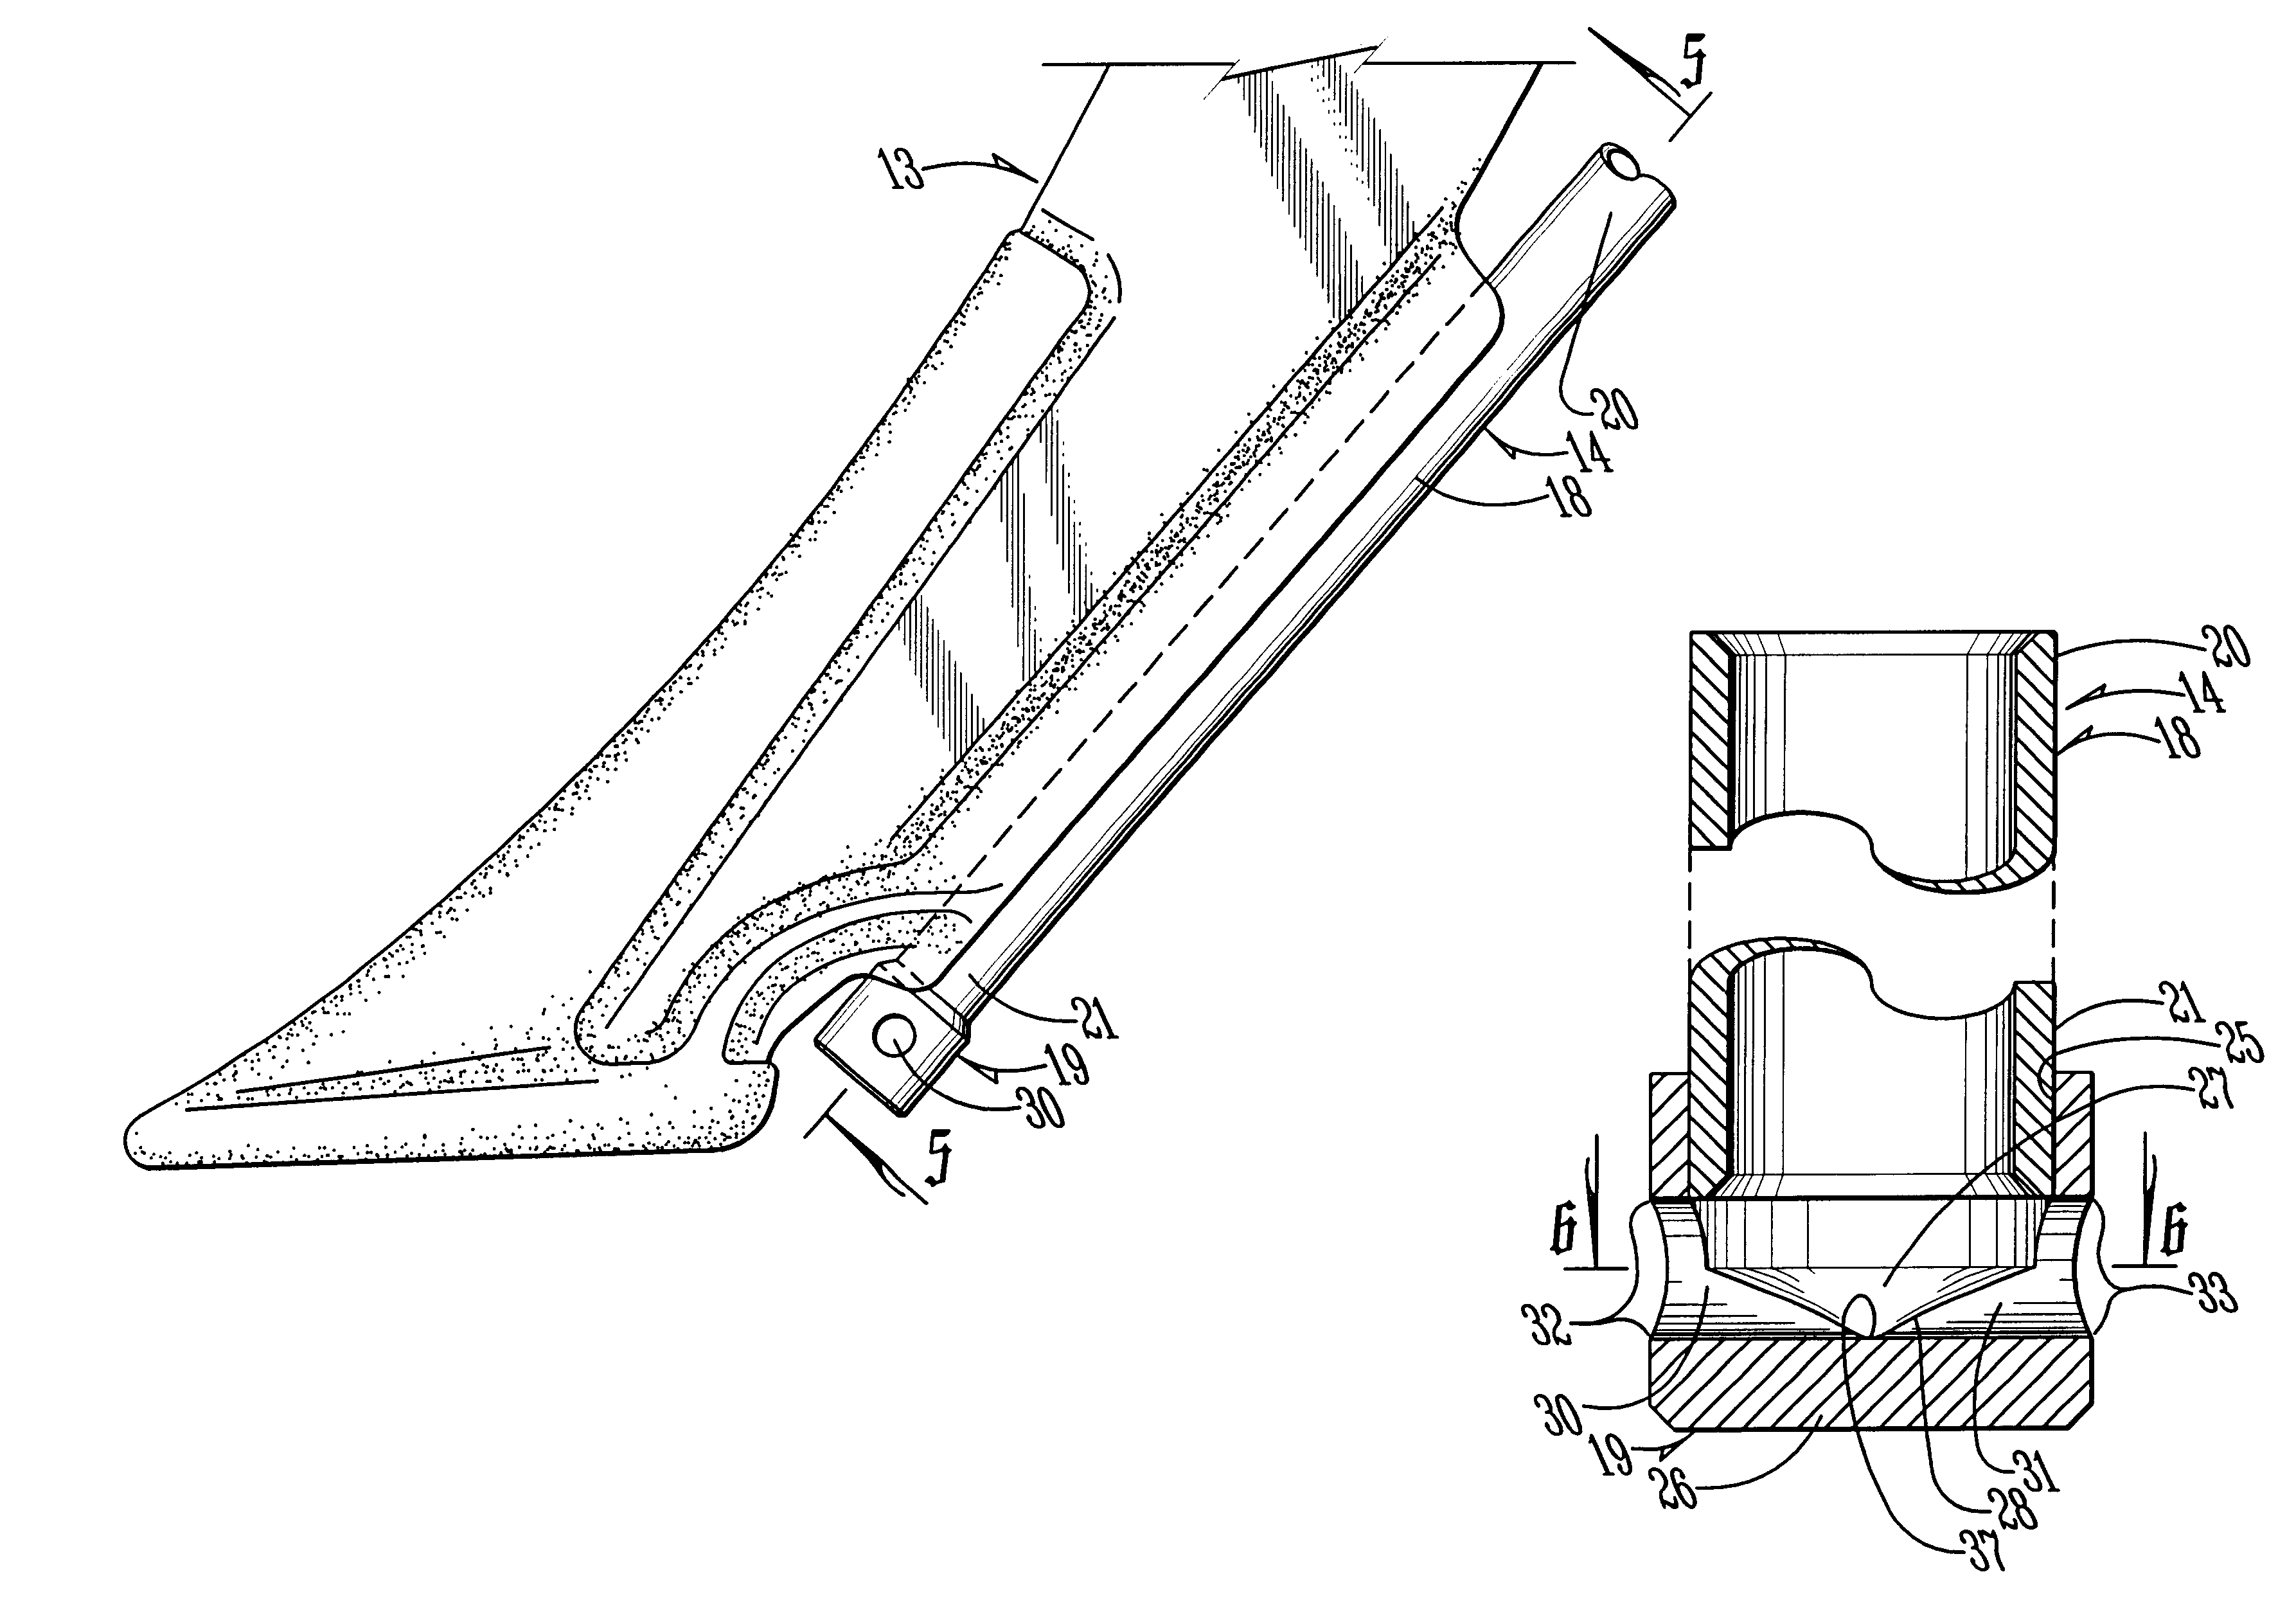 Anhydrous ammonia application device